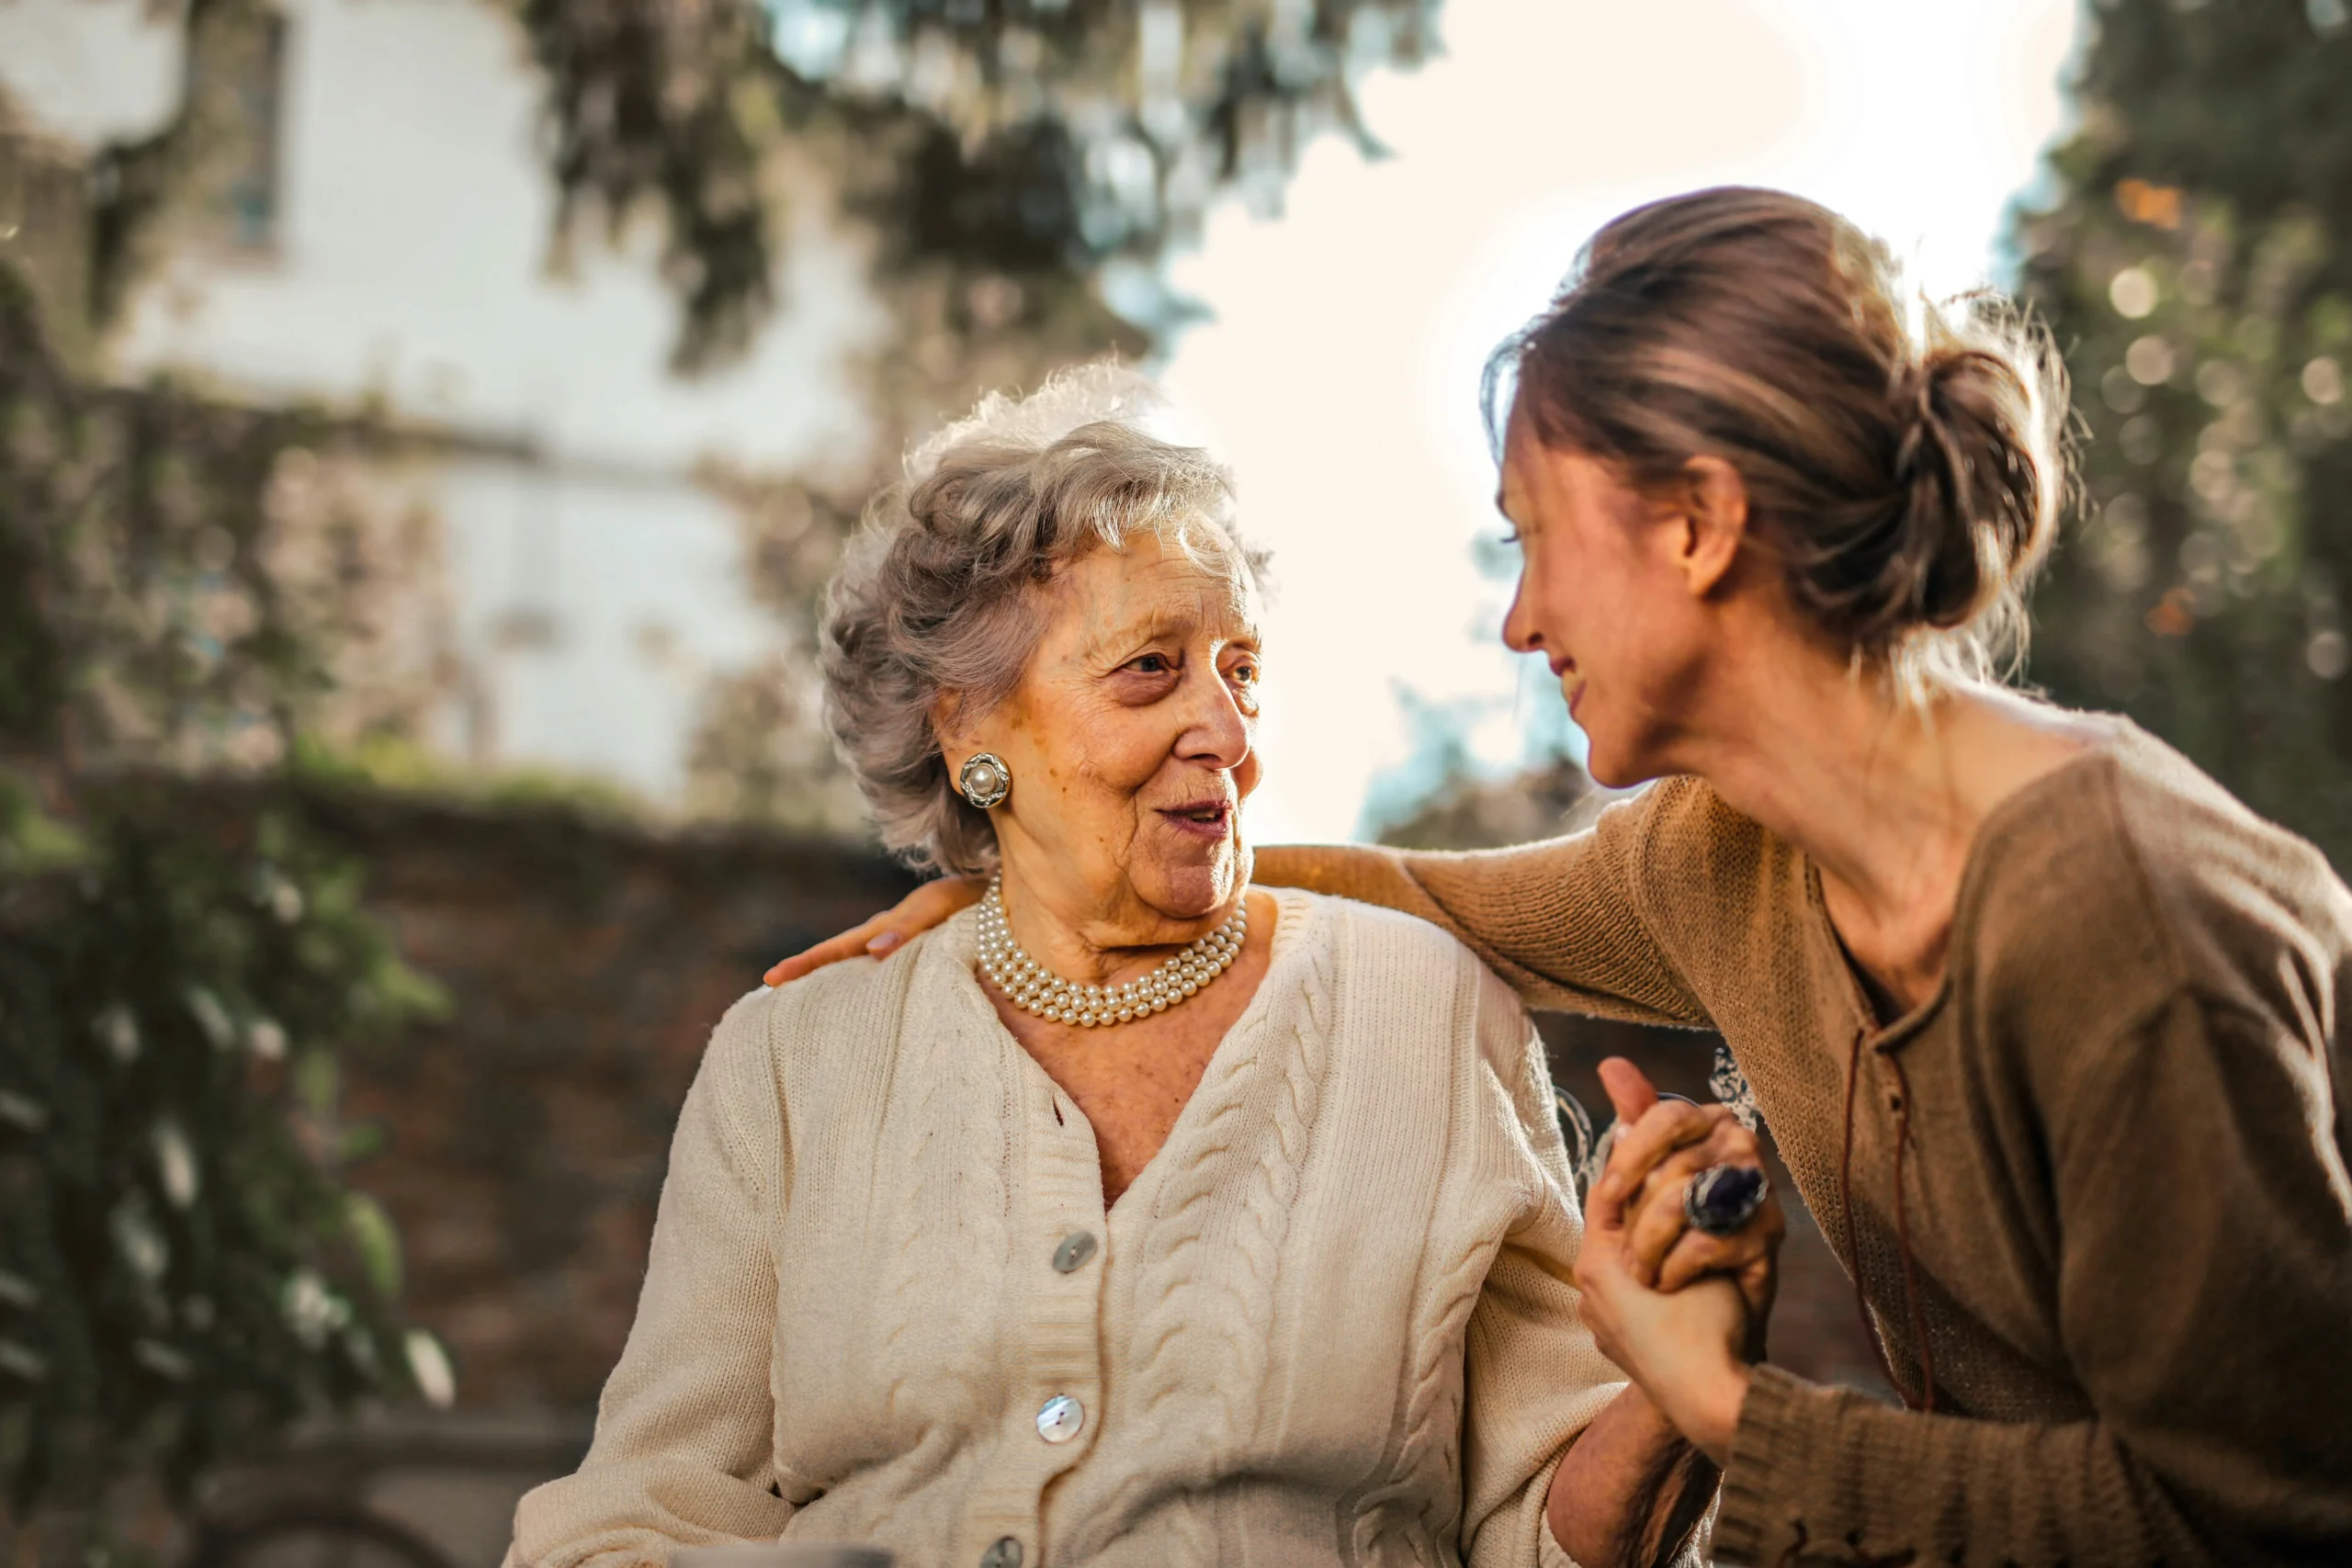 Caring for and communicating with the elderly